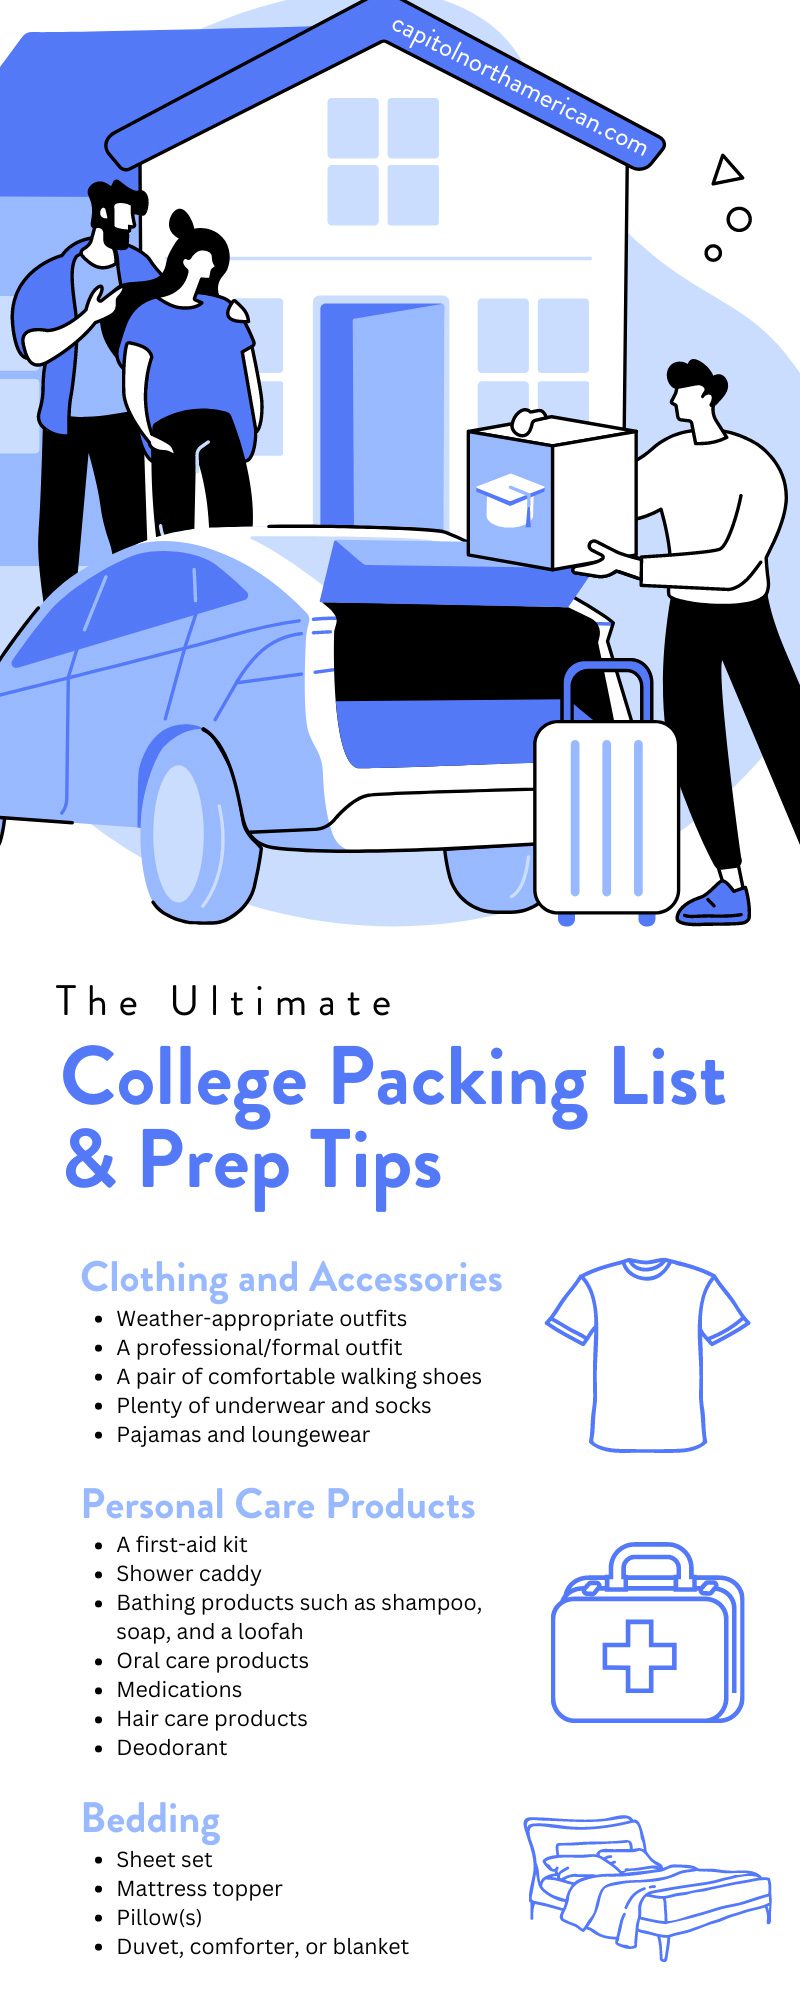 The Ultimate College Packing List & Prep Tips